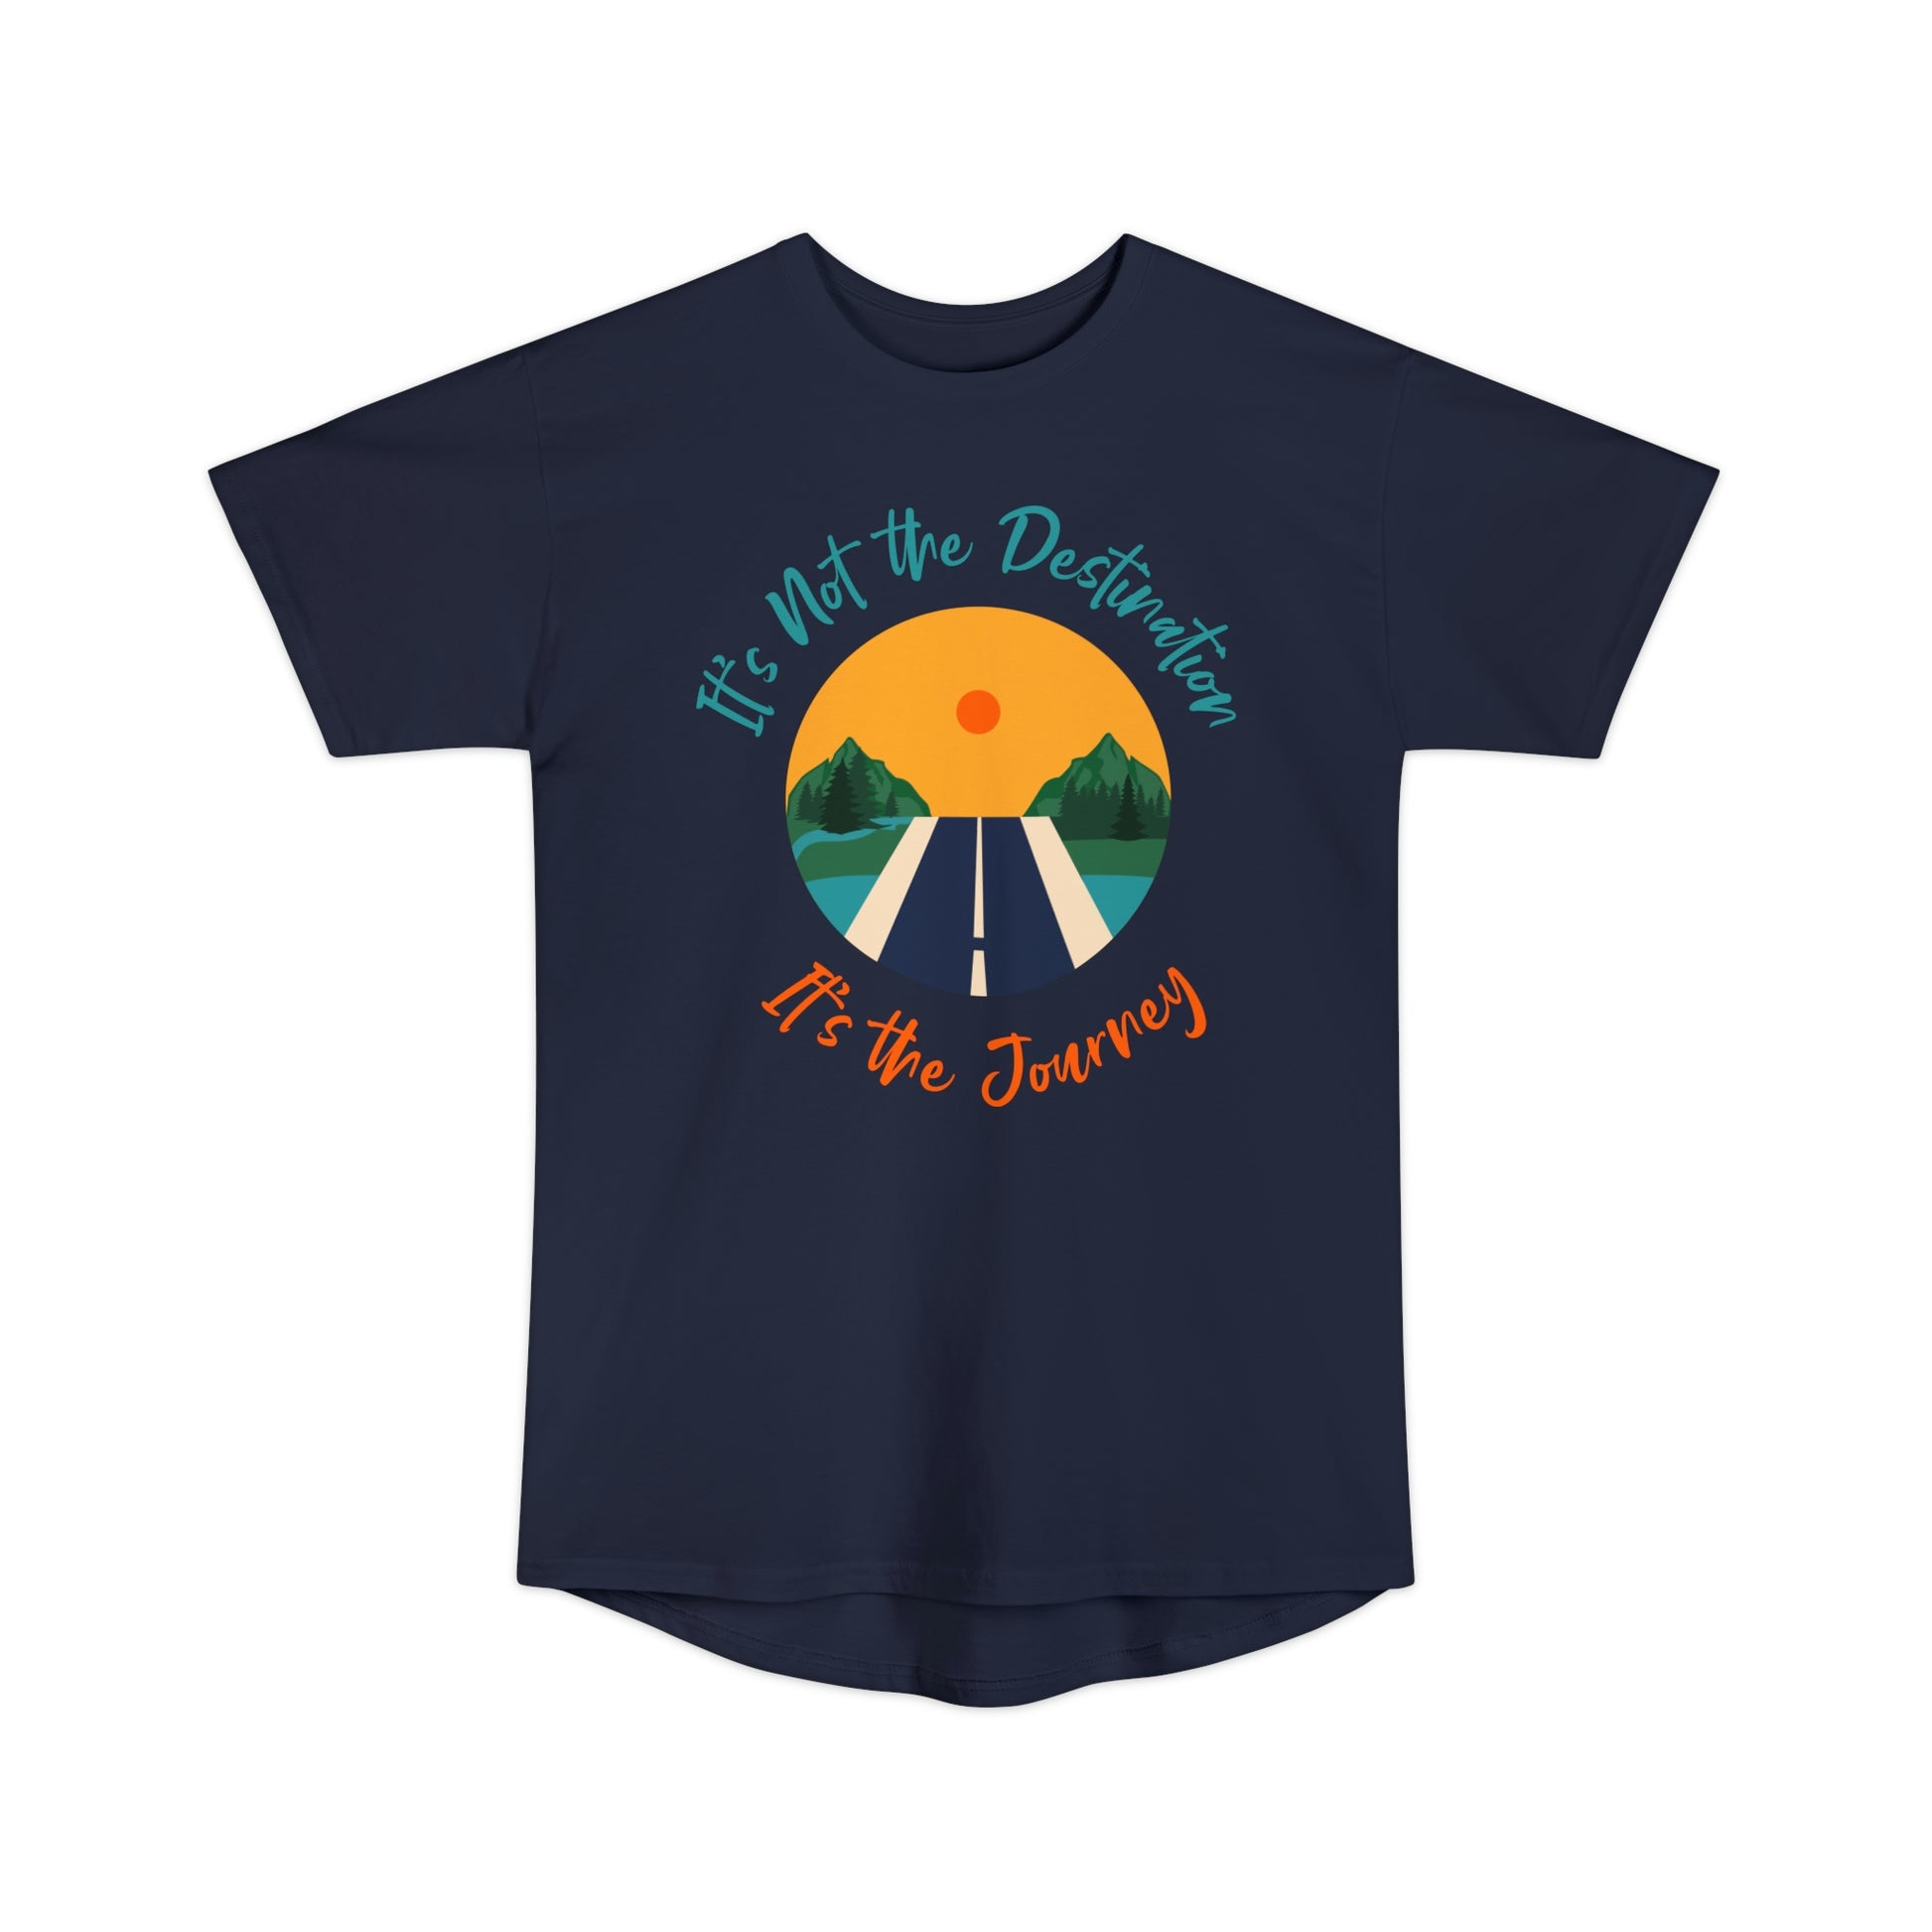 Flat front view of the Navy Blue t-shirt